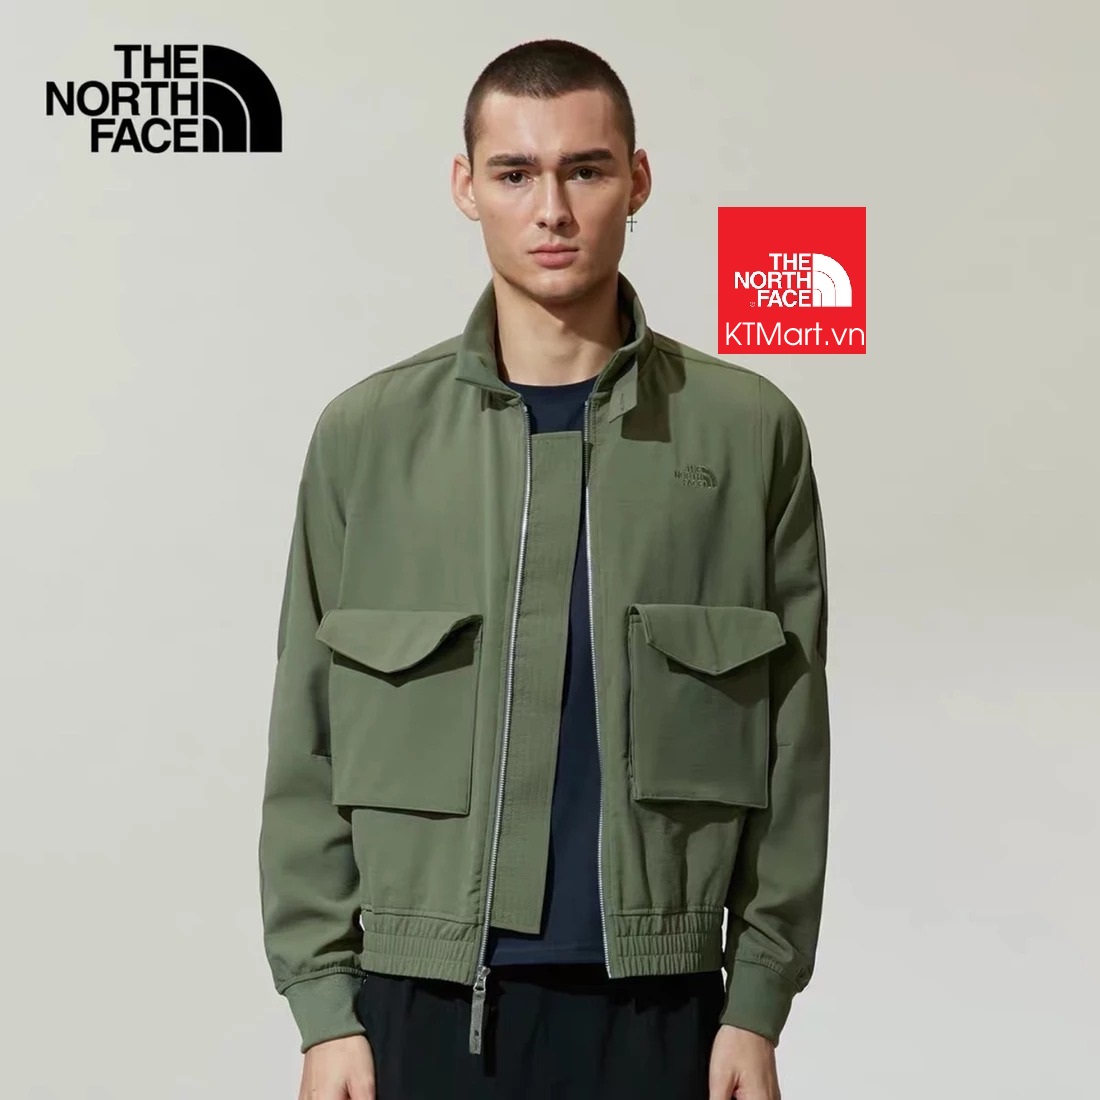 The North Face Urban Exploration Limitless Spring 2019 Collection The North Face size S US